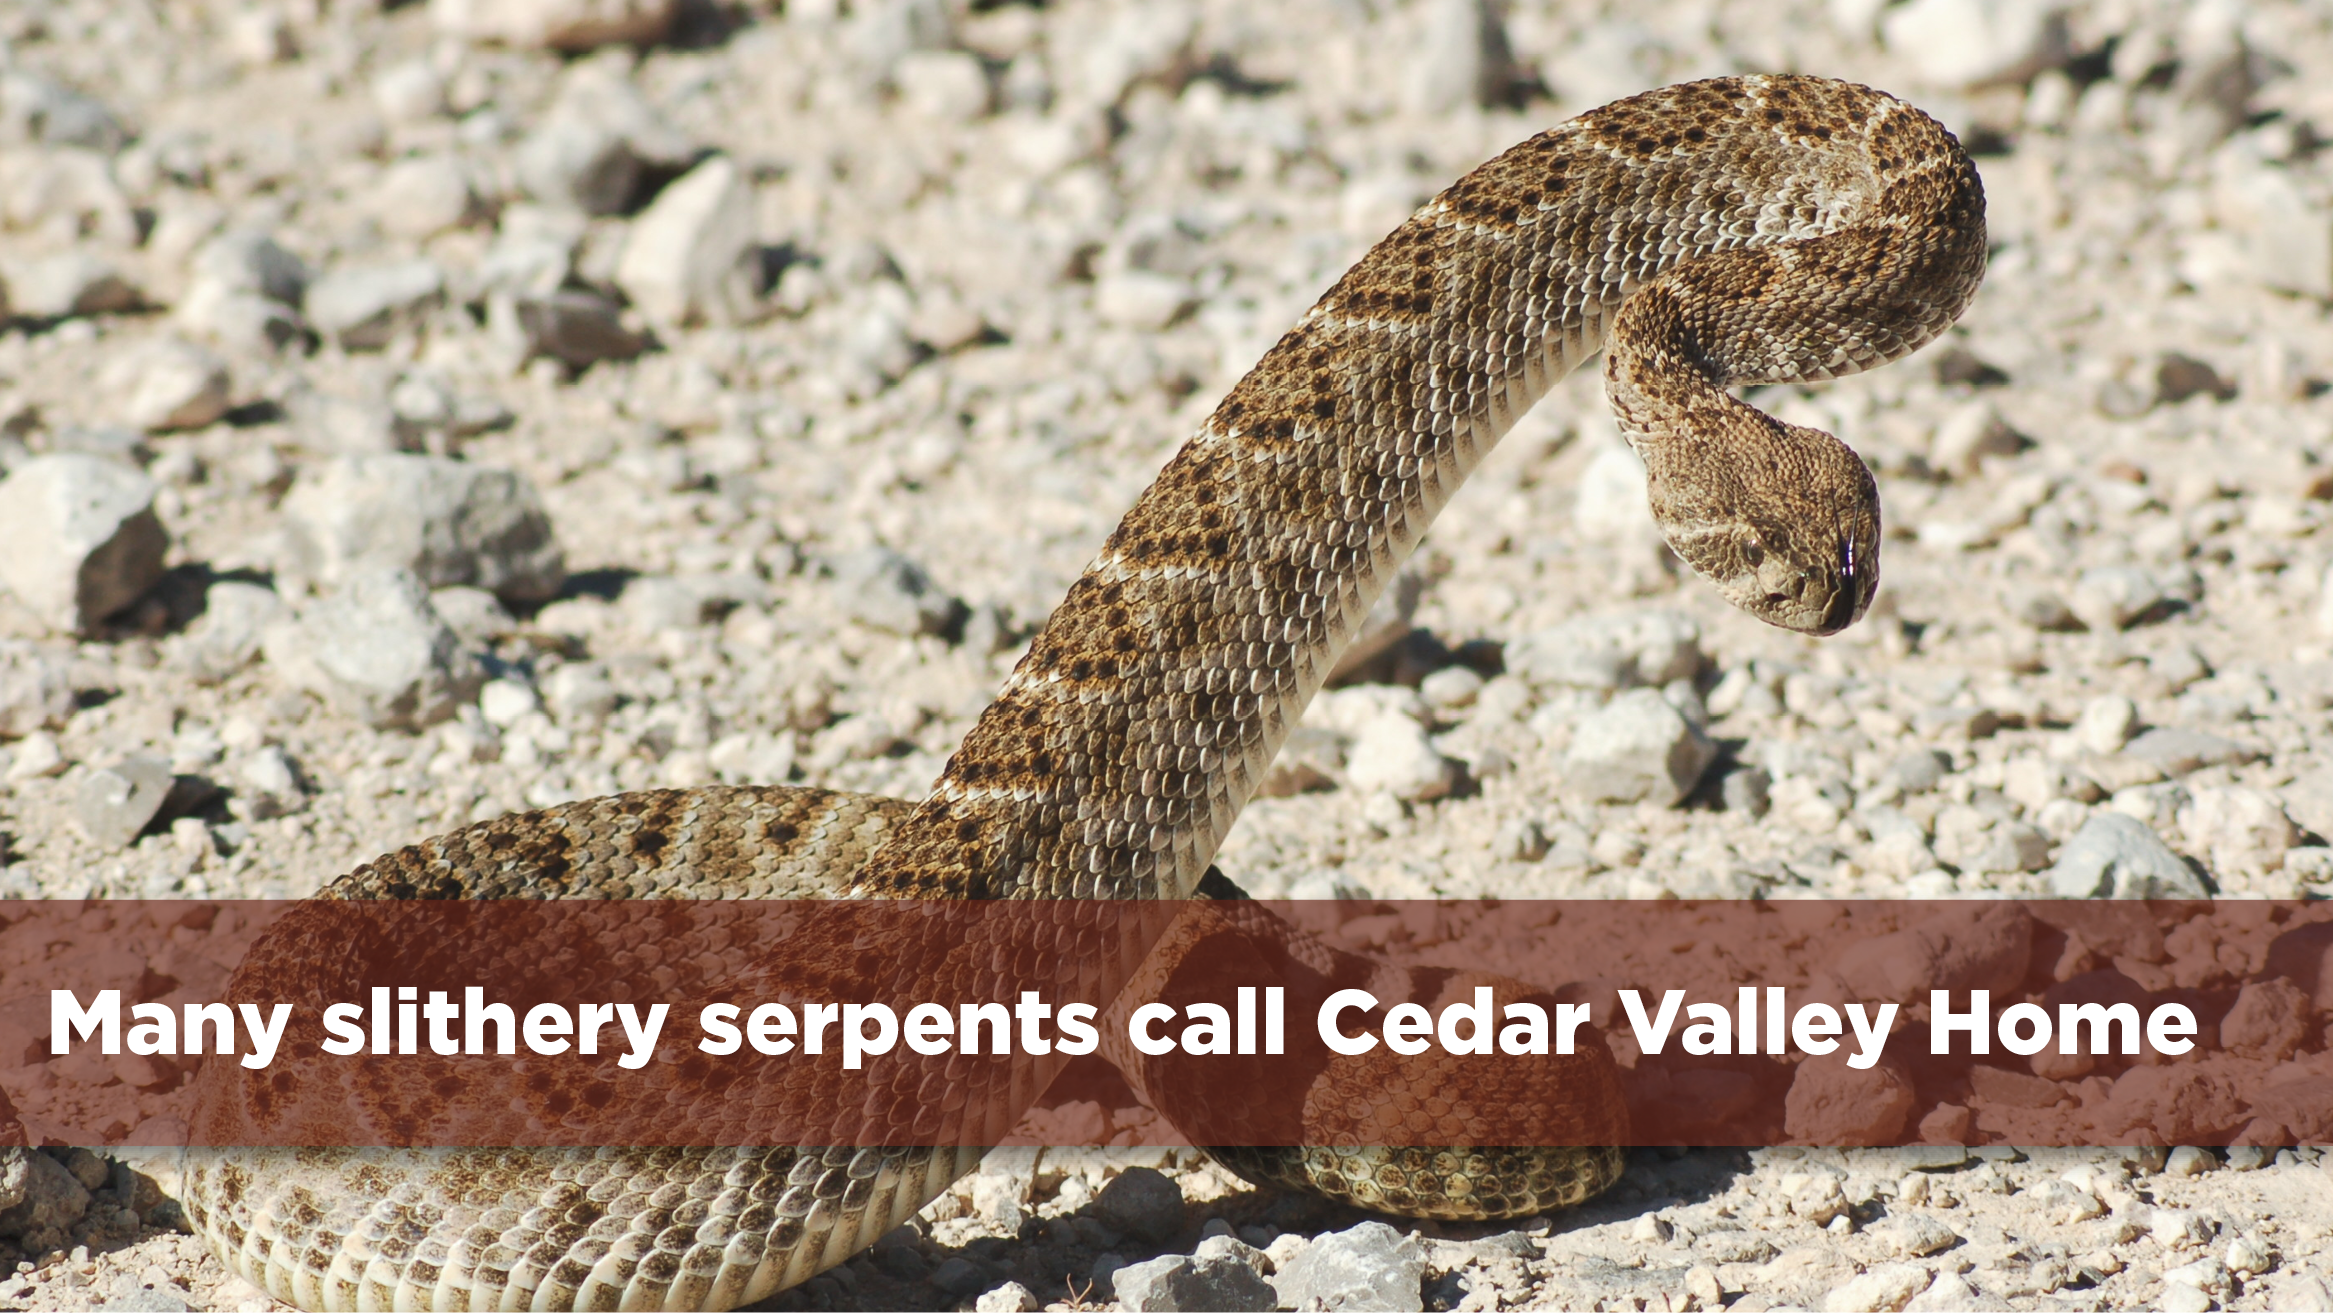 Many slithery serpents call the Cedar Valley home